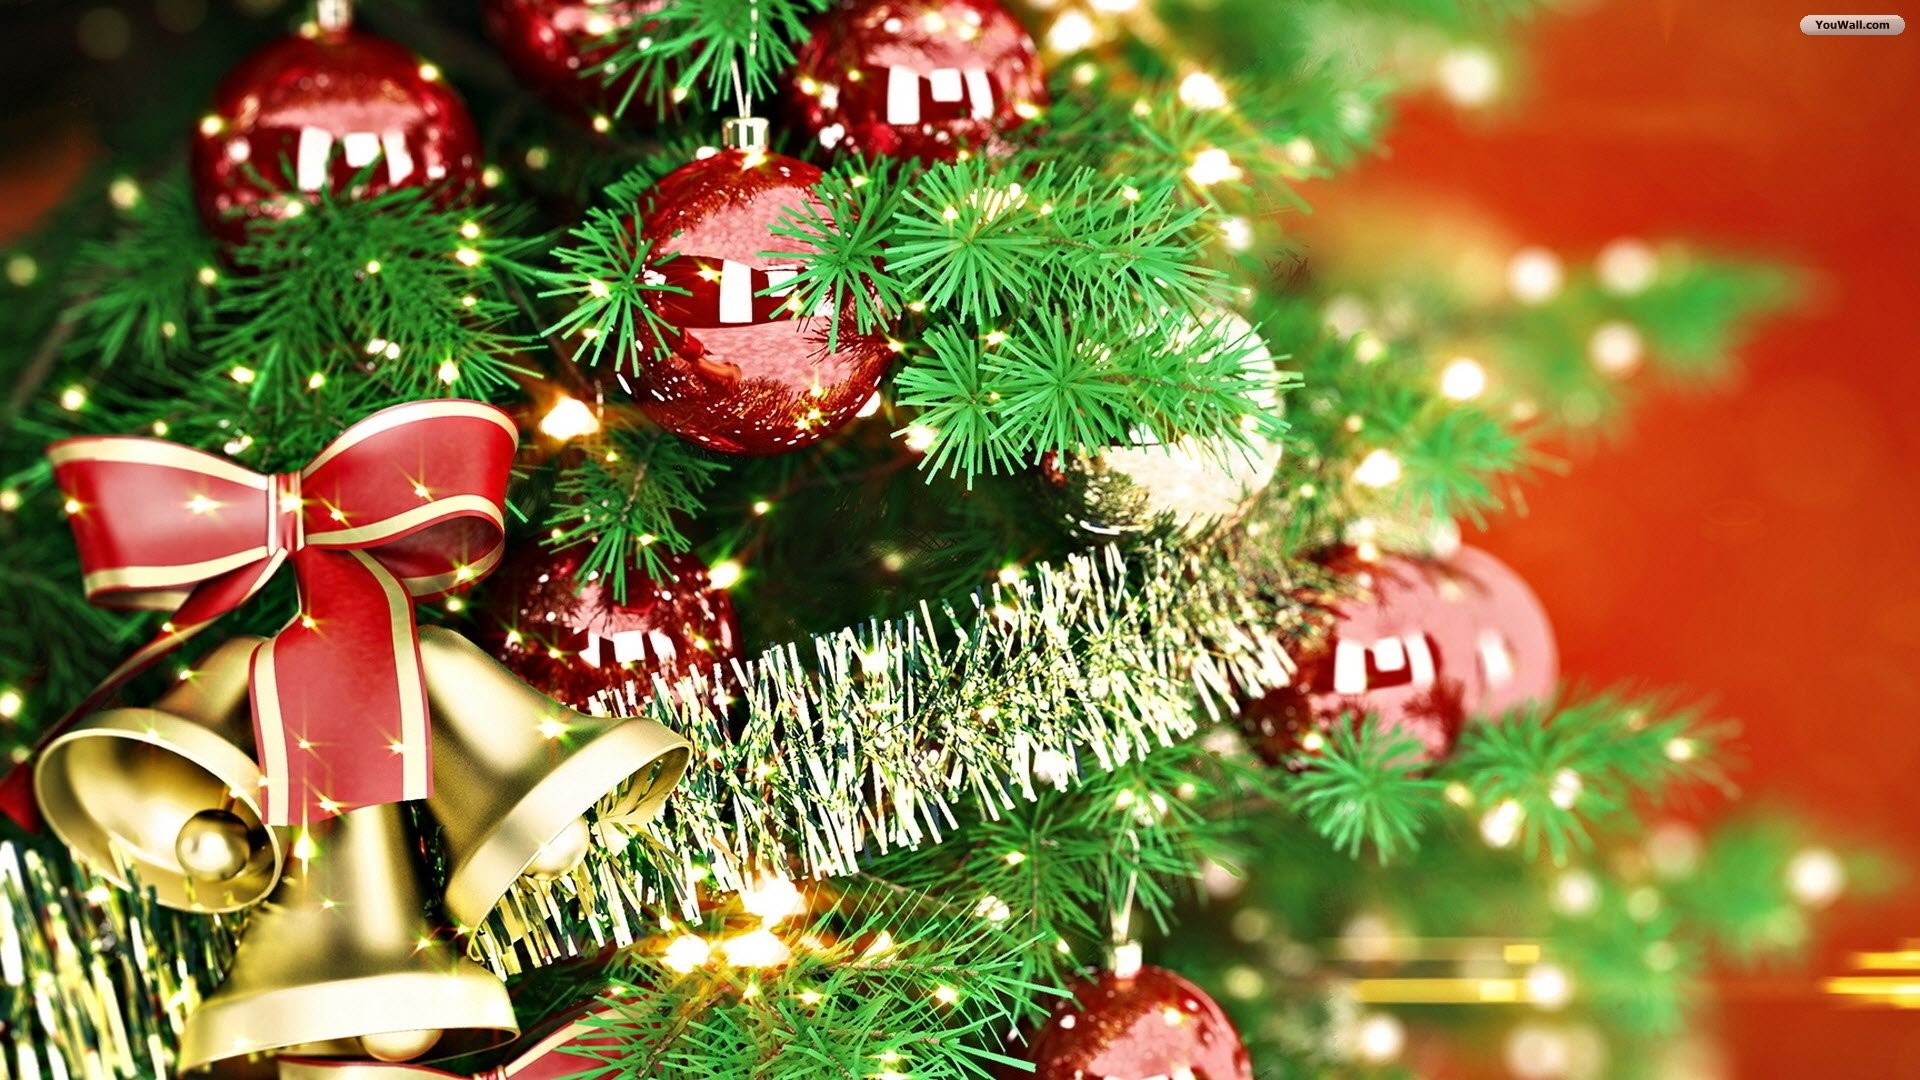 1920x1080 Images Of Christmas Tree Wallpaper Home Design Ideas Top And Desktop  Backgrounds. color affects mood ...